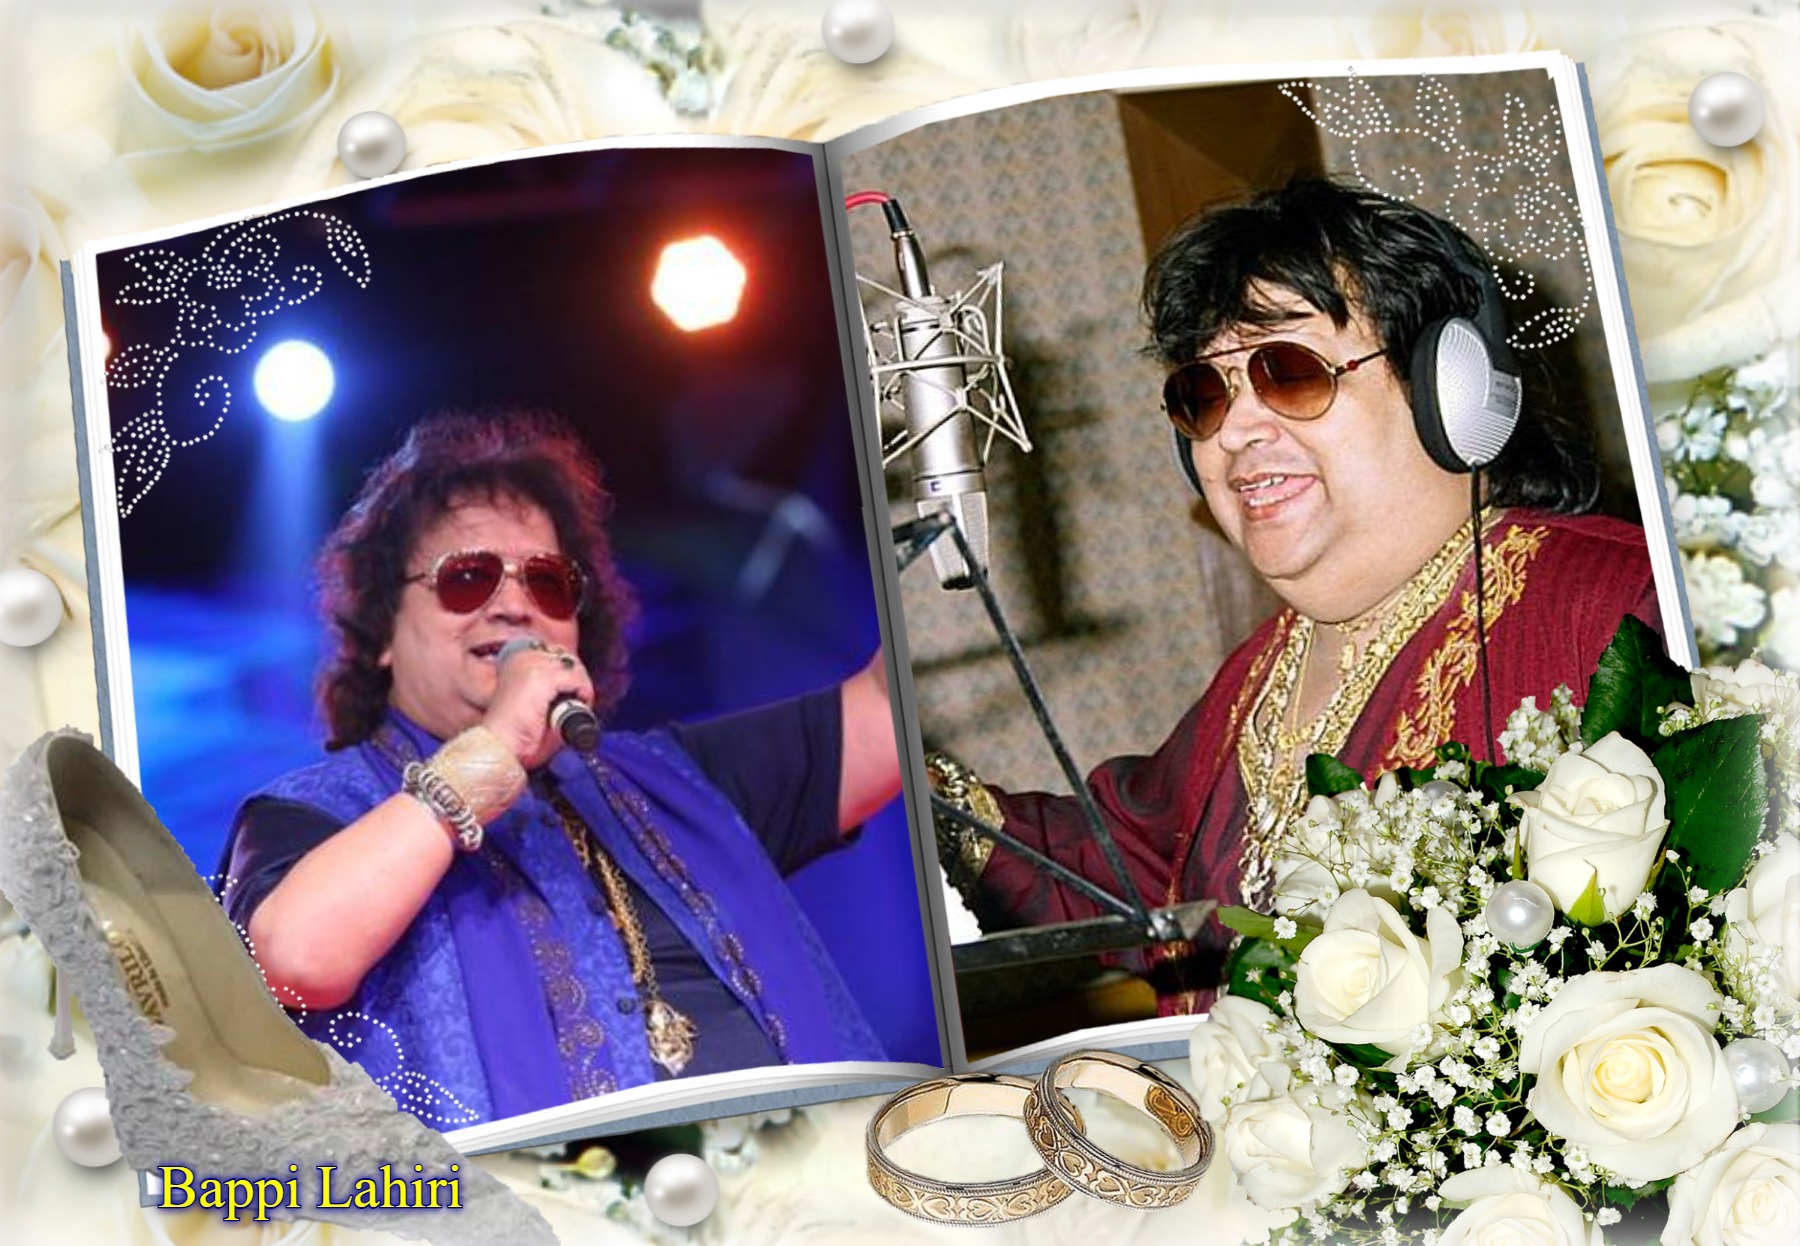 You are currently viewing “Bappi Lahiri Introduced ‘Disco Cult’ in Films”